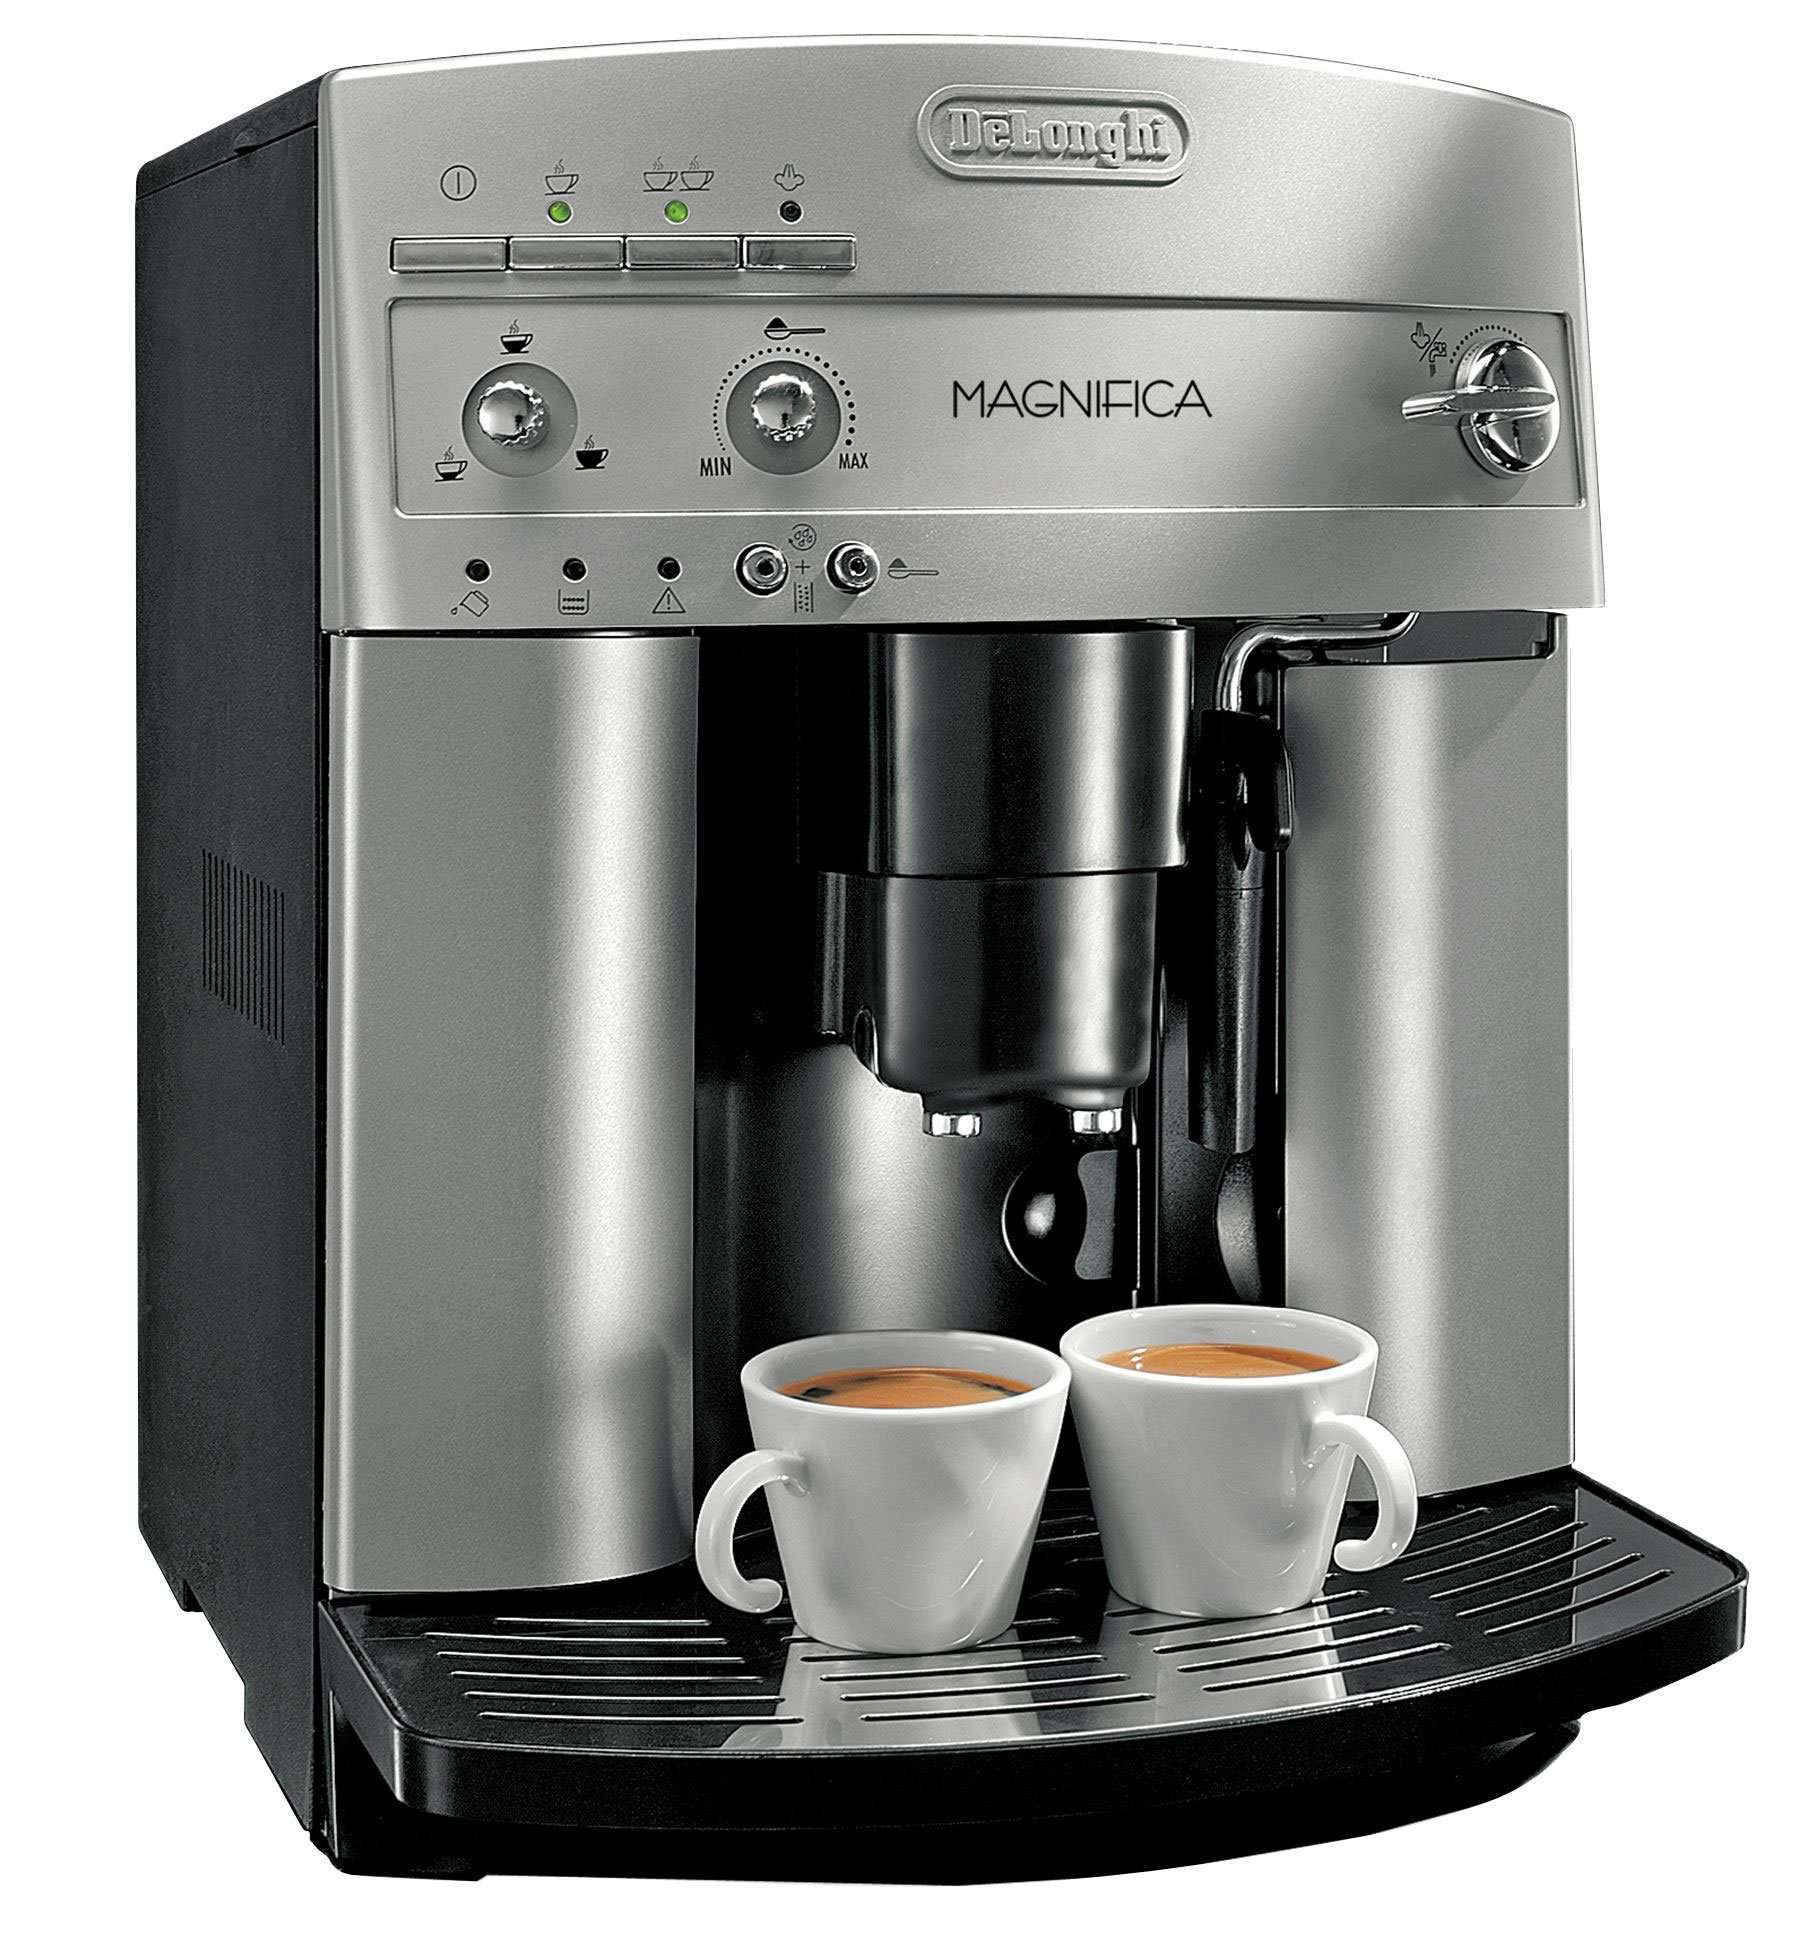 8 Best Coffee Maker with Grinder Reviews 2017